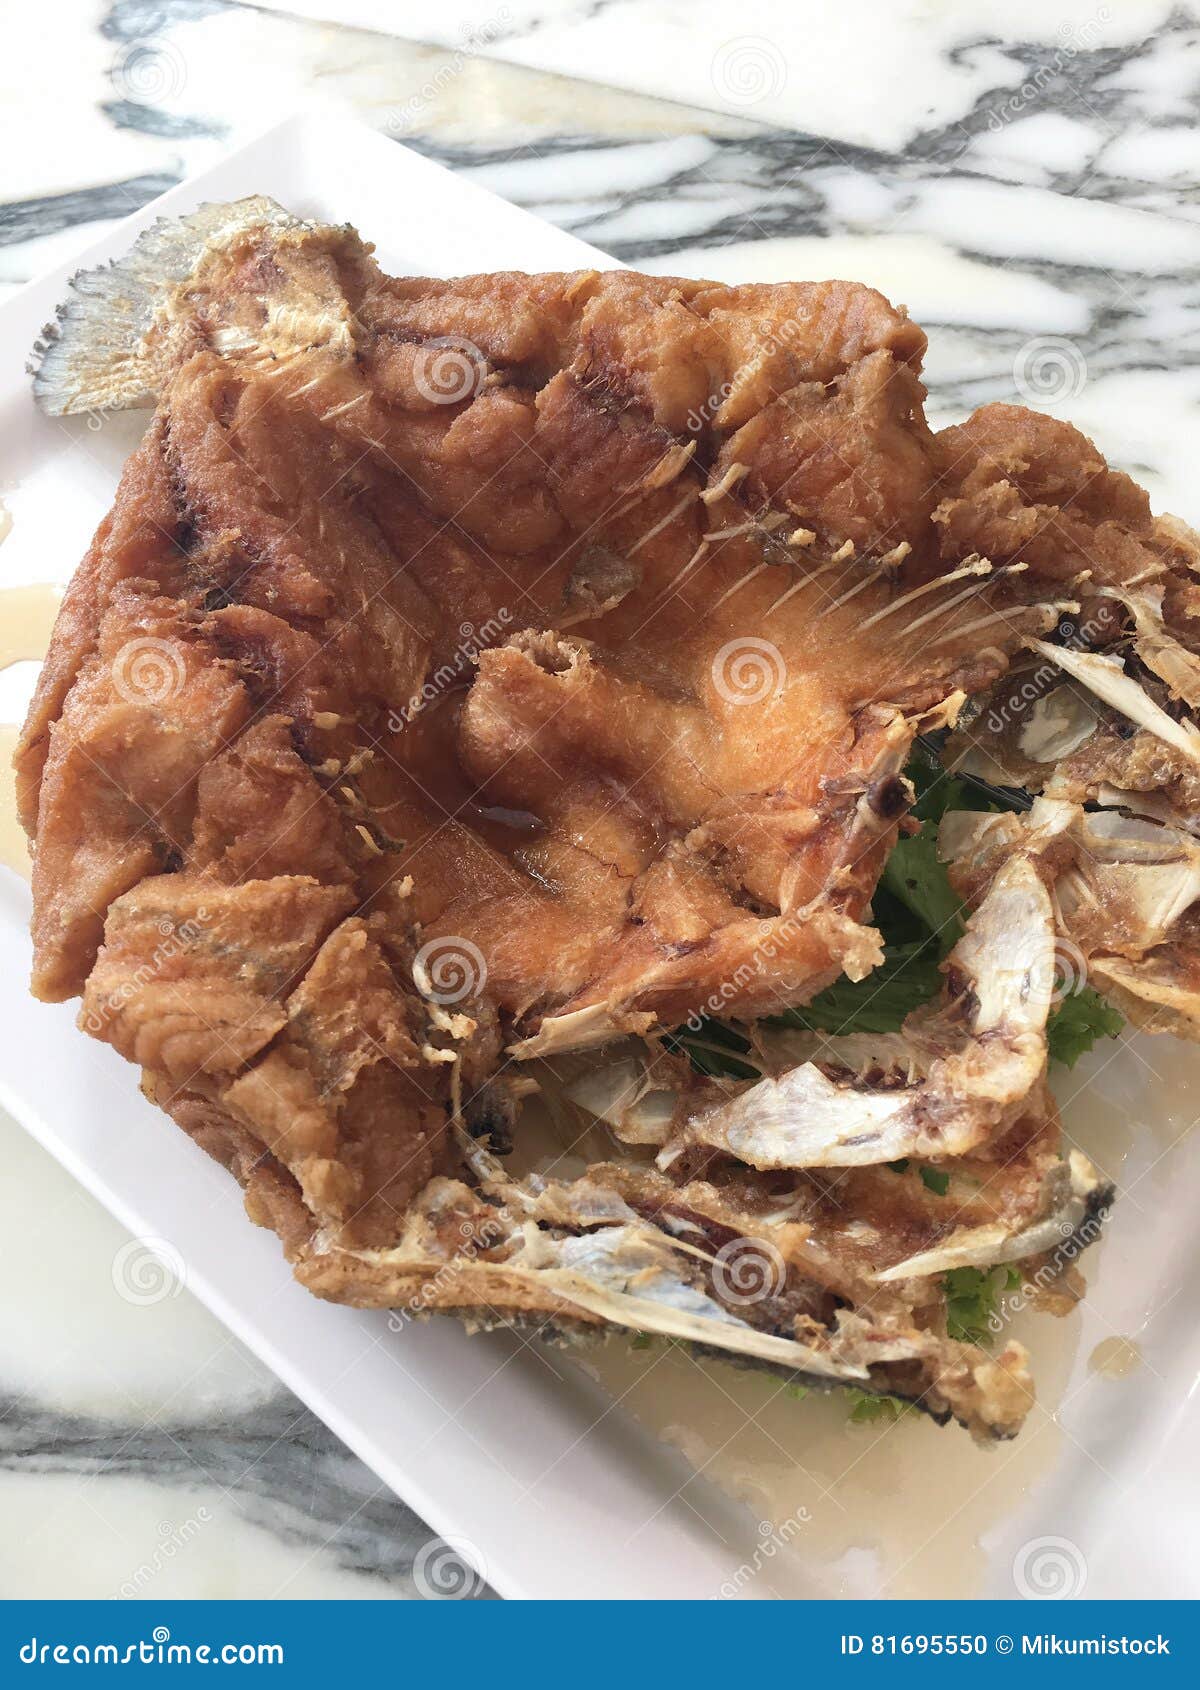 Fried Snapper Fish with Fish Sauce. Stock Photo - Image of fresh, fish ...